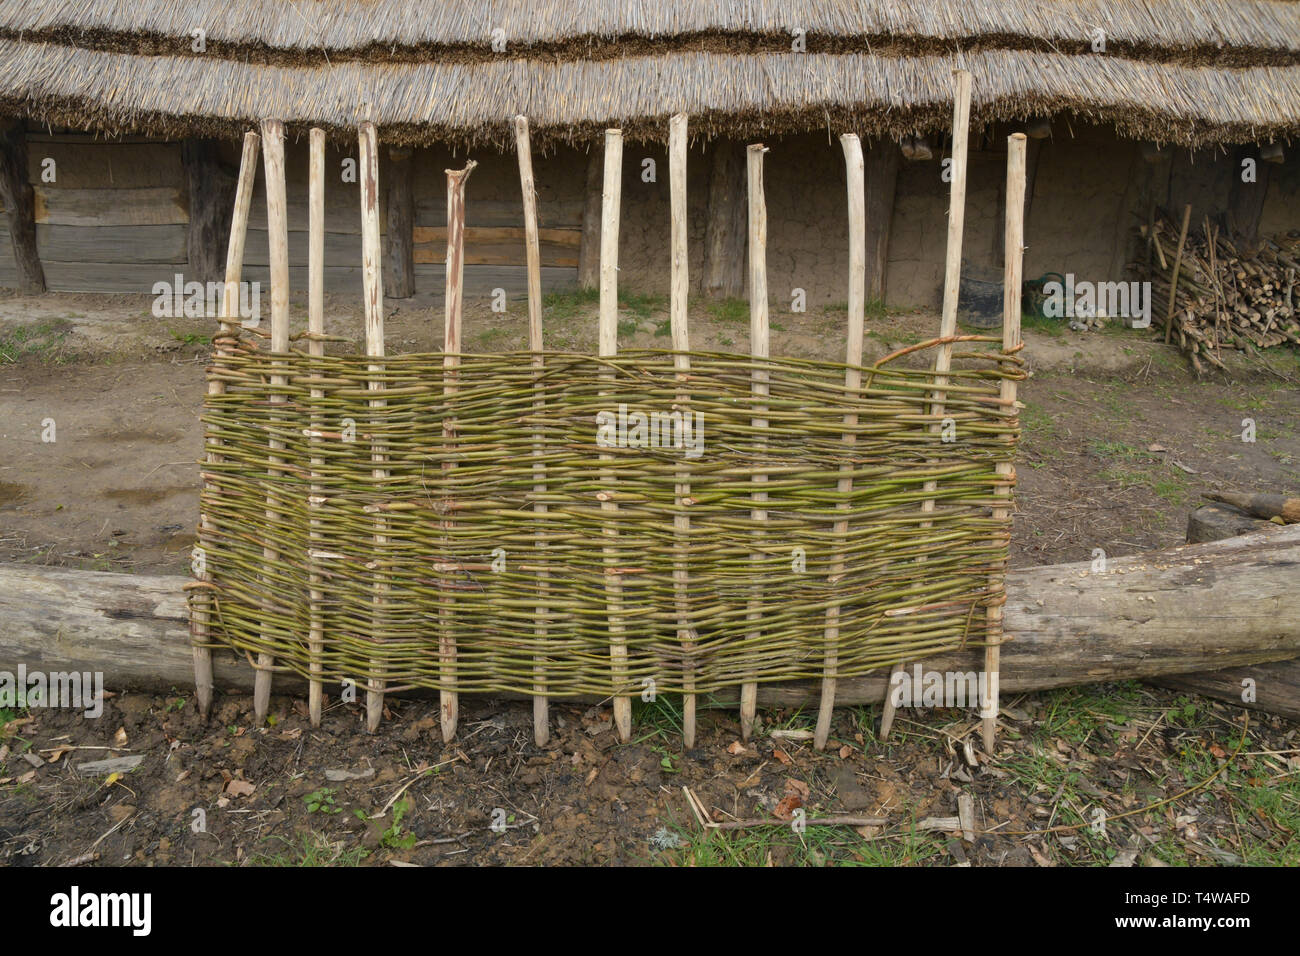 Wattle hurdle made at La Hougue Bie museum in Jersey.With hazel uprights and woven willow it forms a eco friendly fence.Jersey, Channel Islands, UK Stock Photo